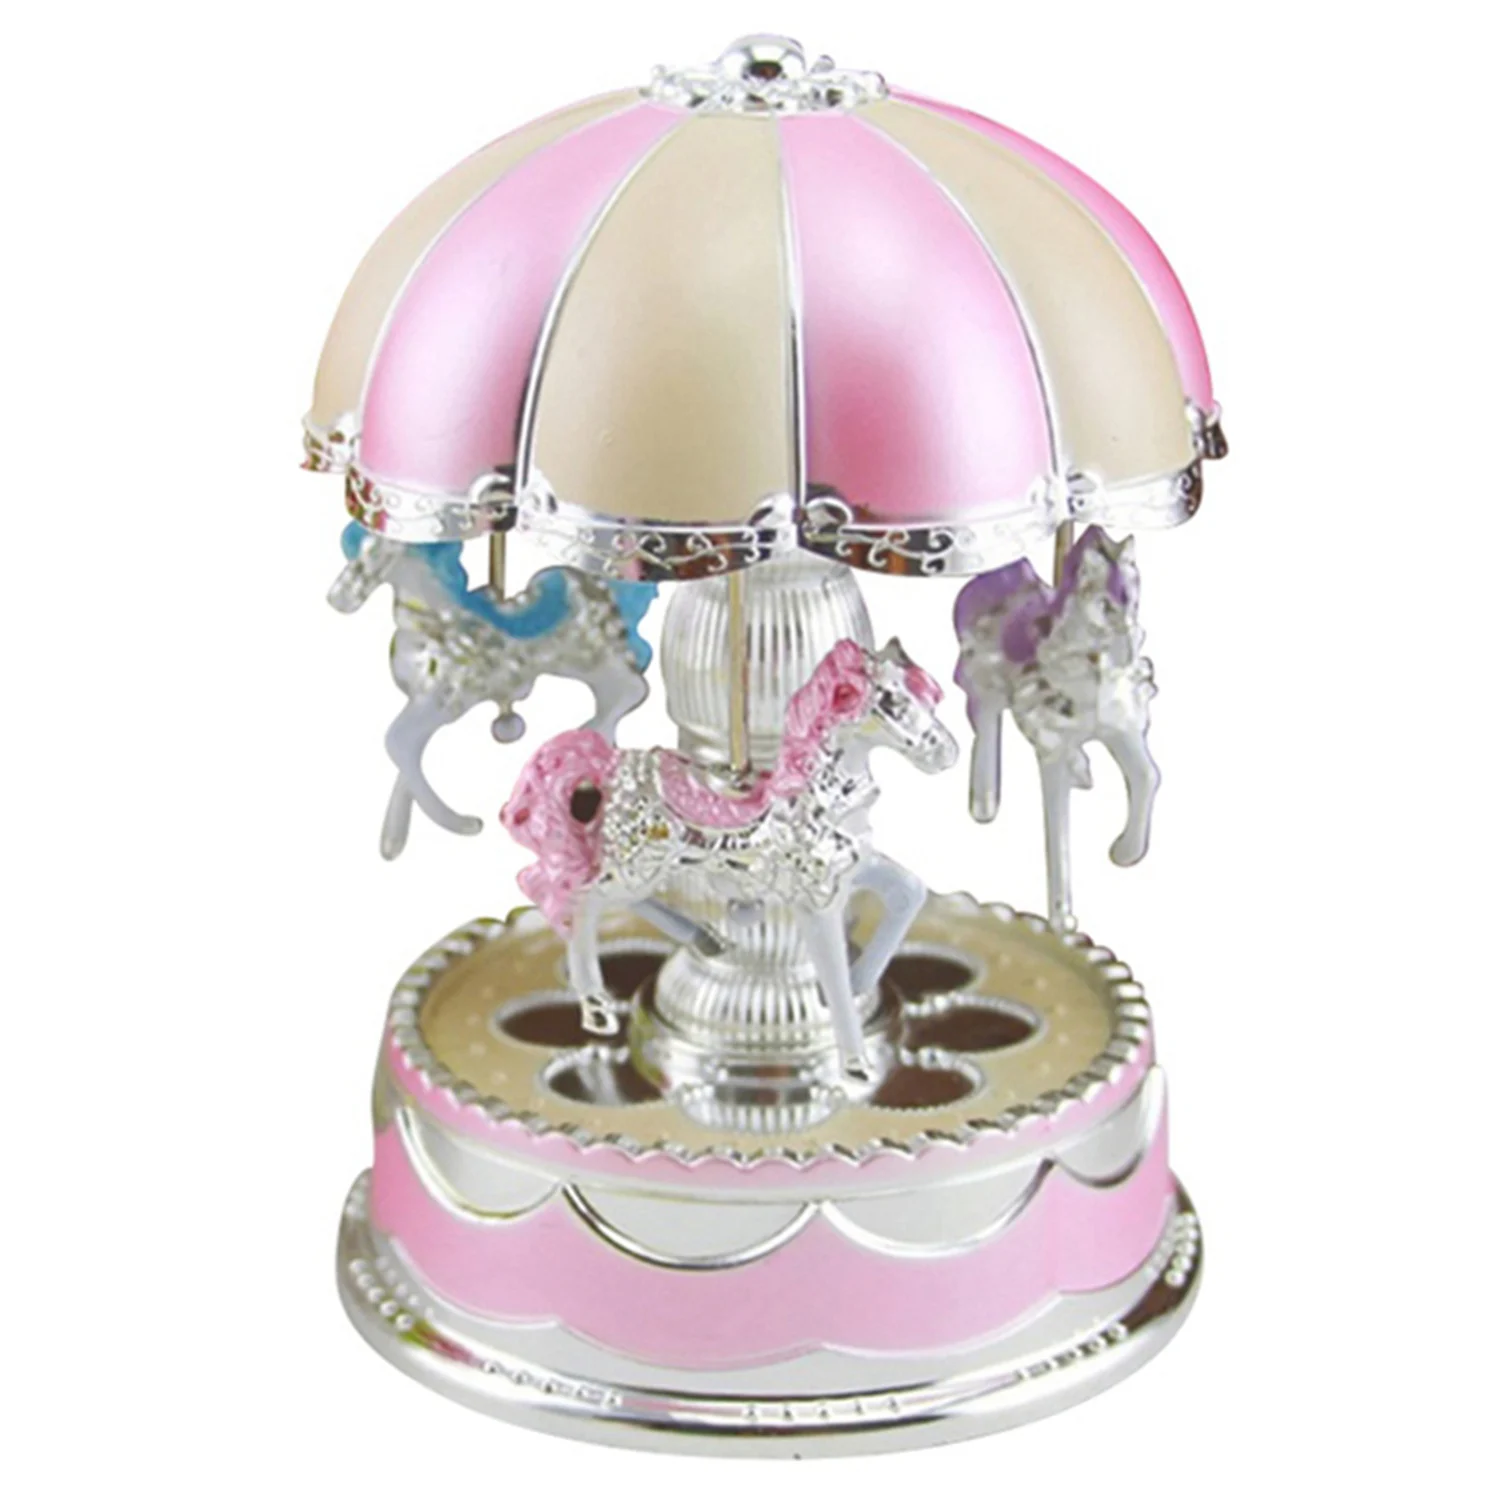 

Fashion Merry-Go-Round Carousel Music Box Toy Swivel Glowing Carousel Horse Electronic Music Box Wedding Birthday Gifts Home D